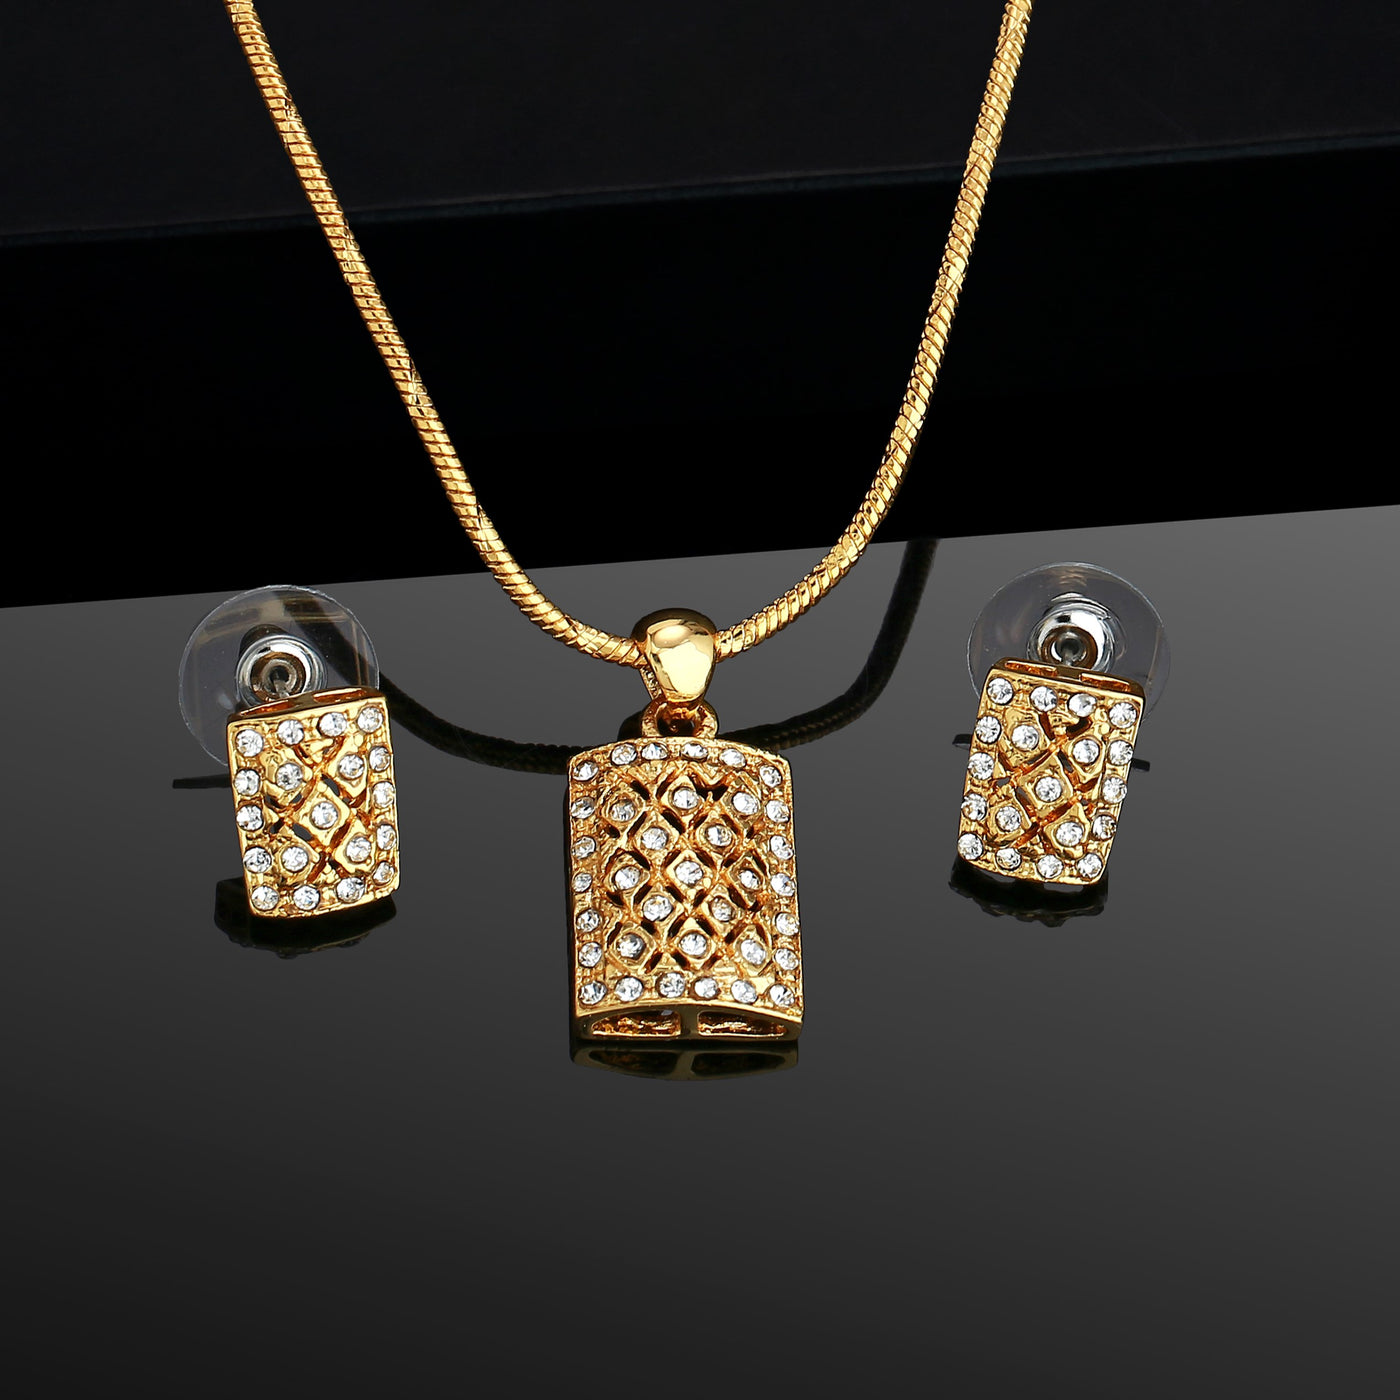 Estele 24 Kt Gold Plated American Diamond Chain Necklace Set for Women